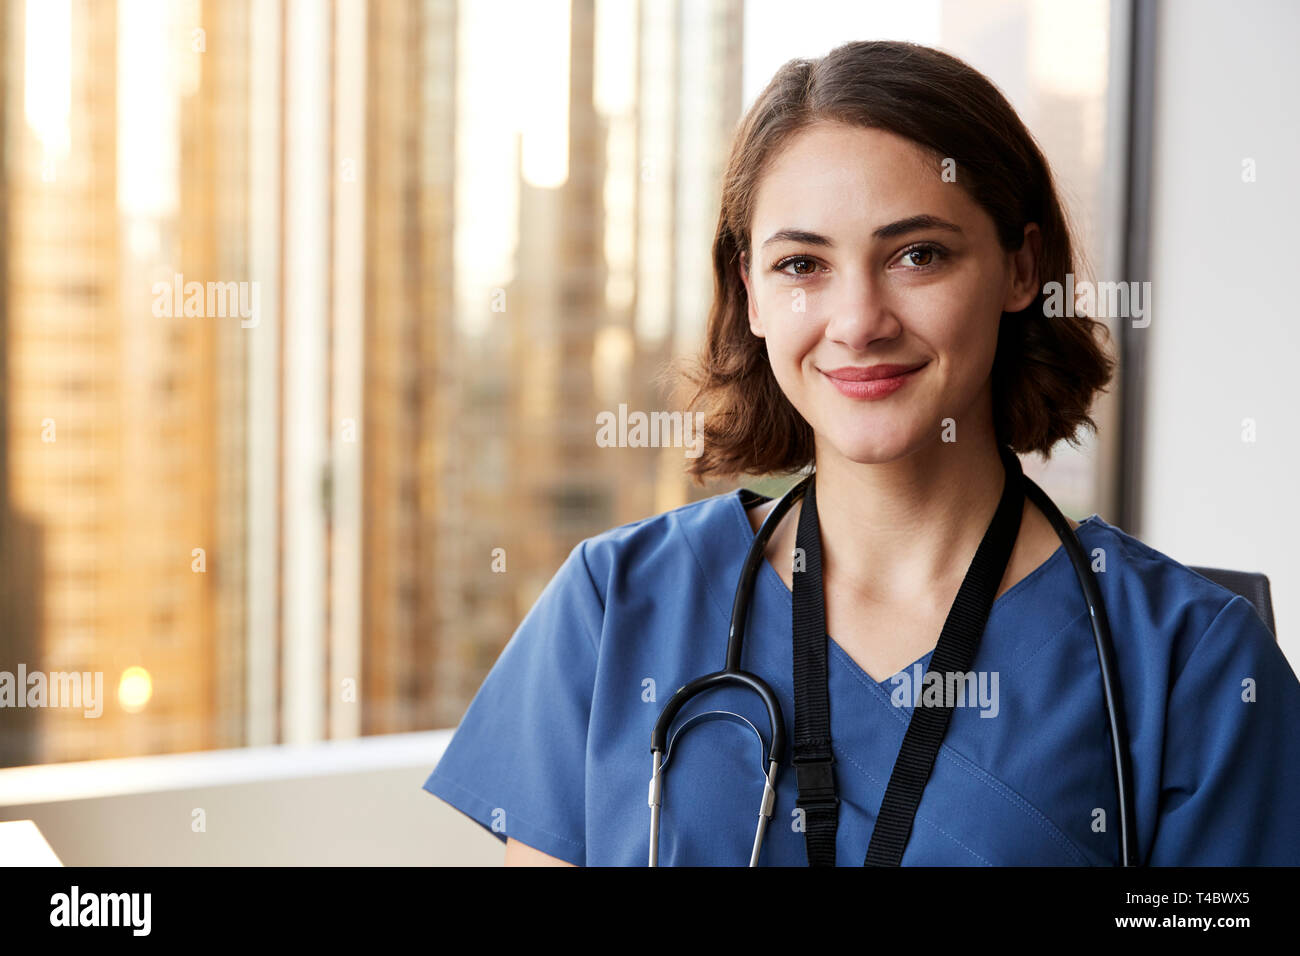 Portrait Of Smiling Female Doctor Wearing Scrubs With Stethoscope In Hospital Office Stock Photo